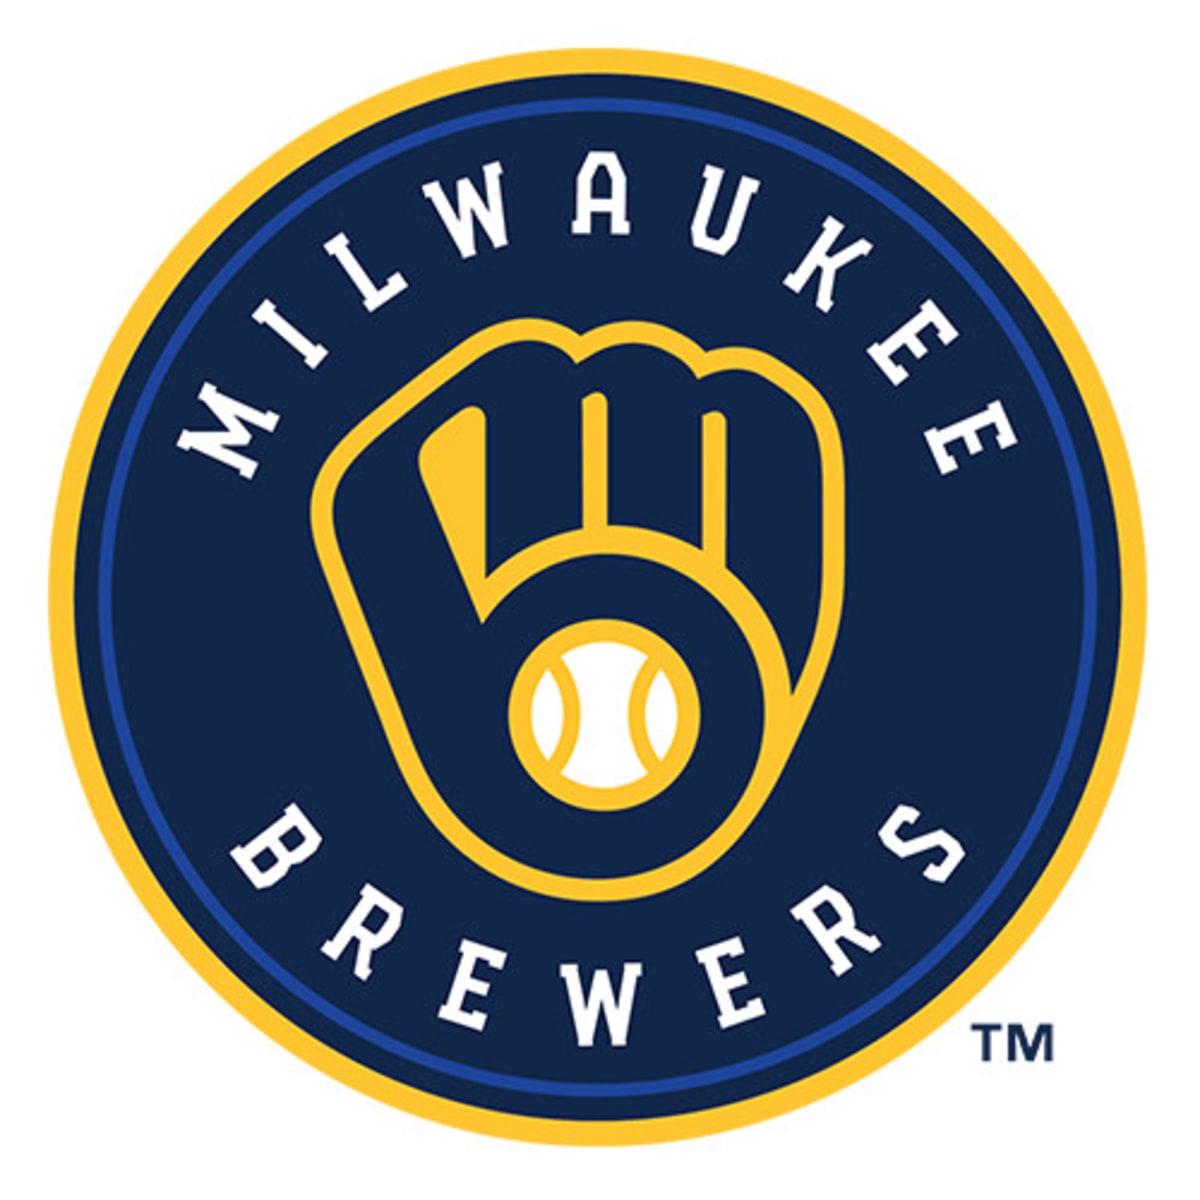 Milwaukee Brewers Special Event Logo - National League (NL) - Chris  Creamer's Sports Logos Page 